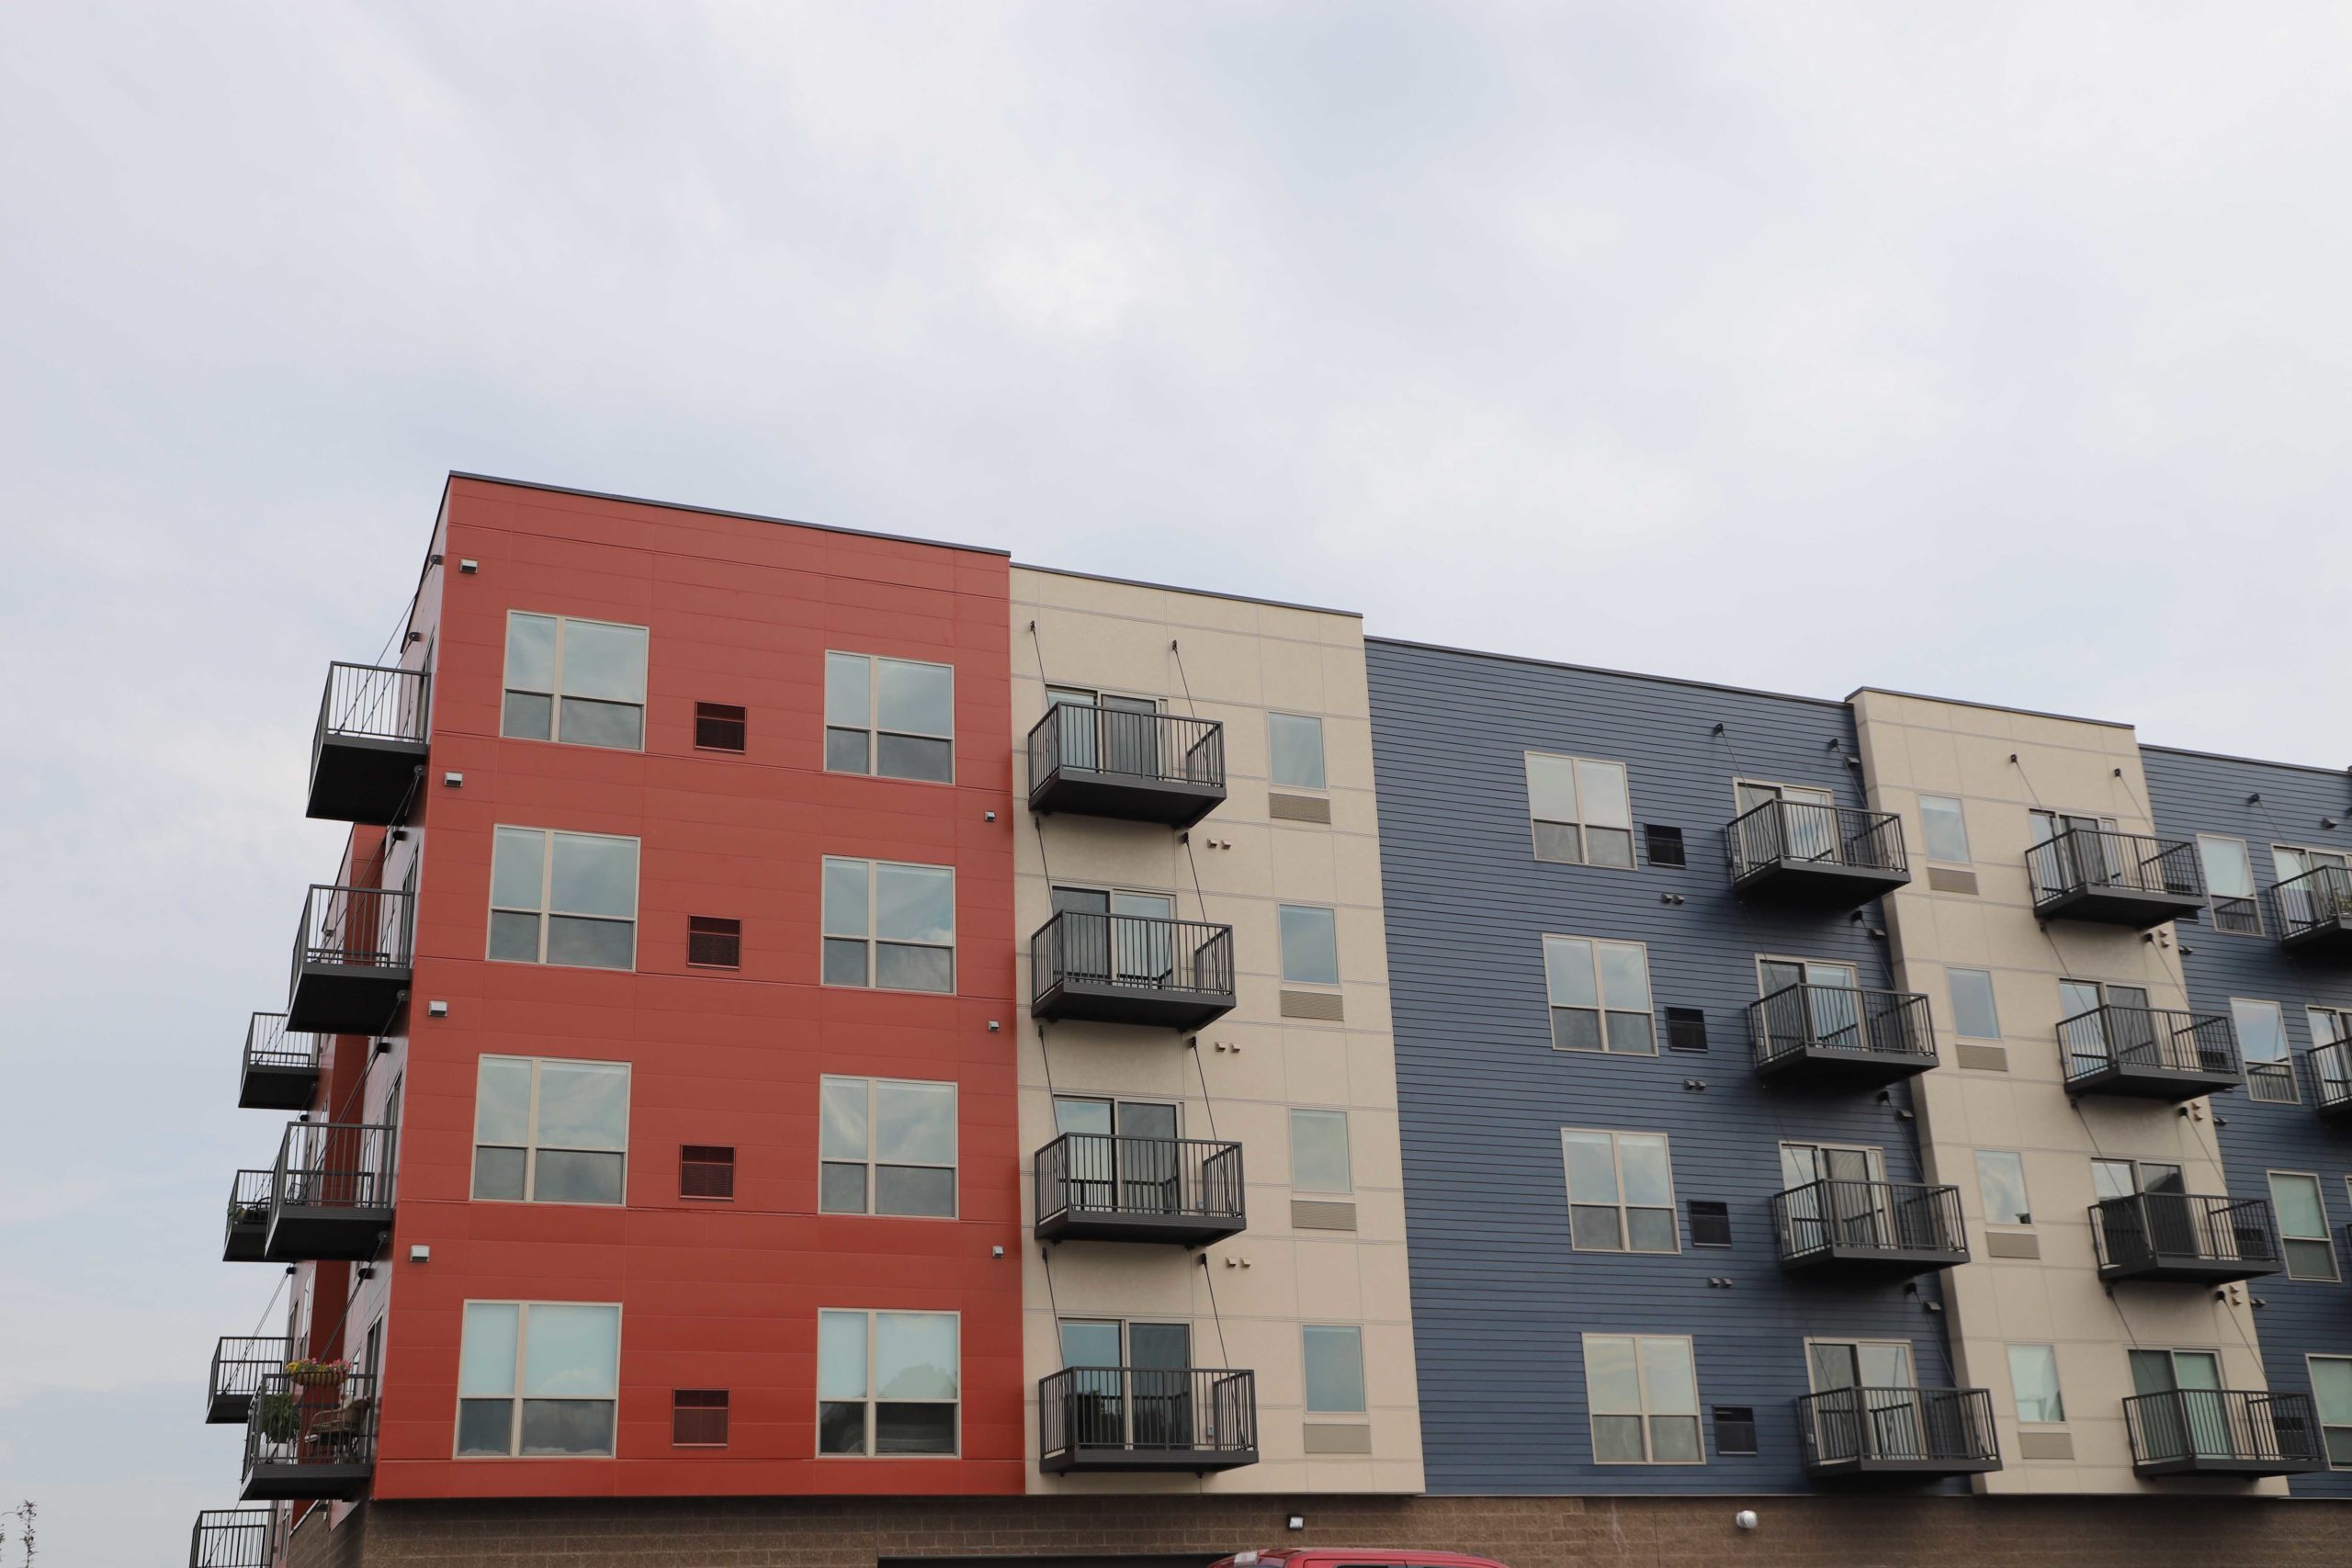 A red, cream and blue five-story apartment building with balconies in Shakopee, MN.